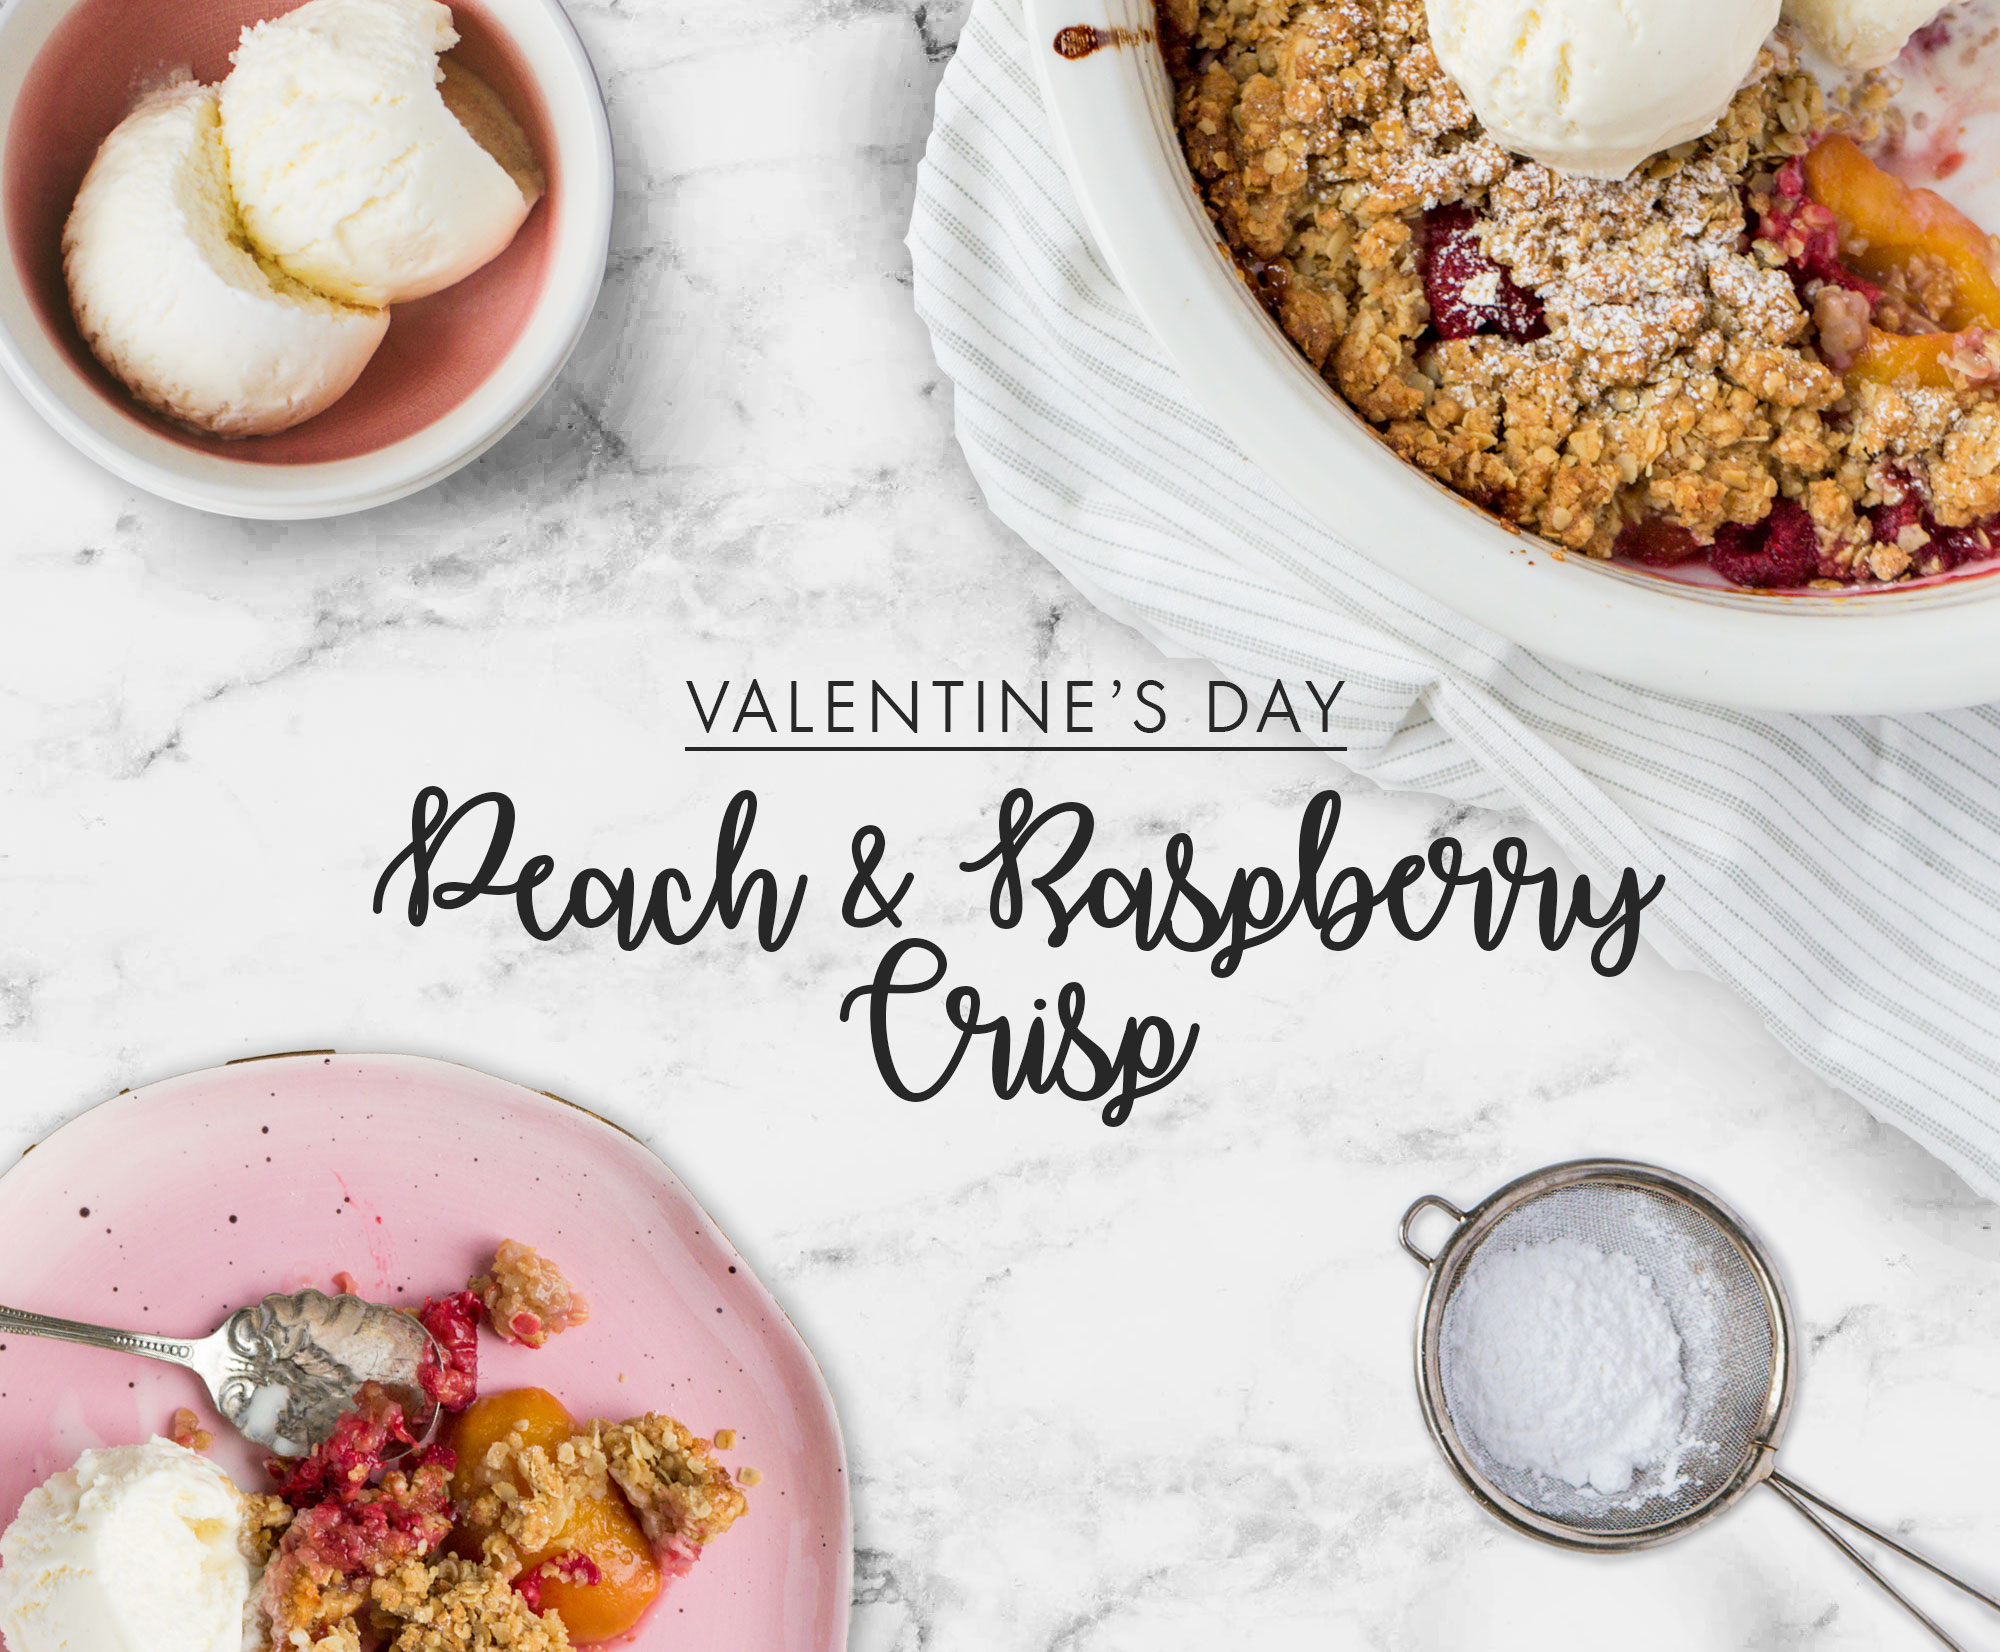 Peach and Raspberry Crisp for Valentine's Day